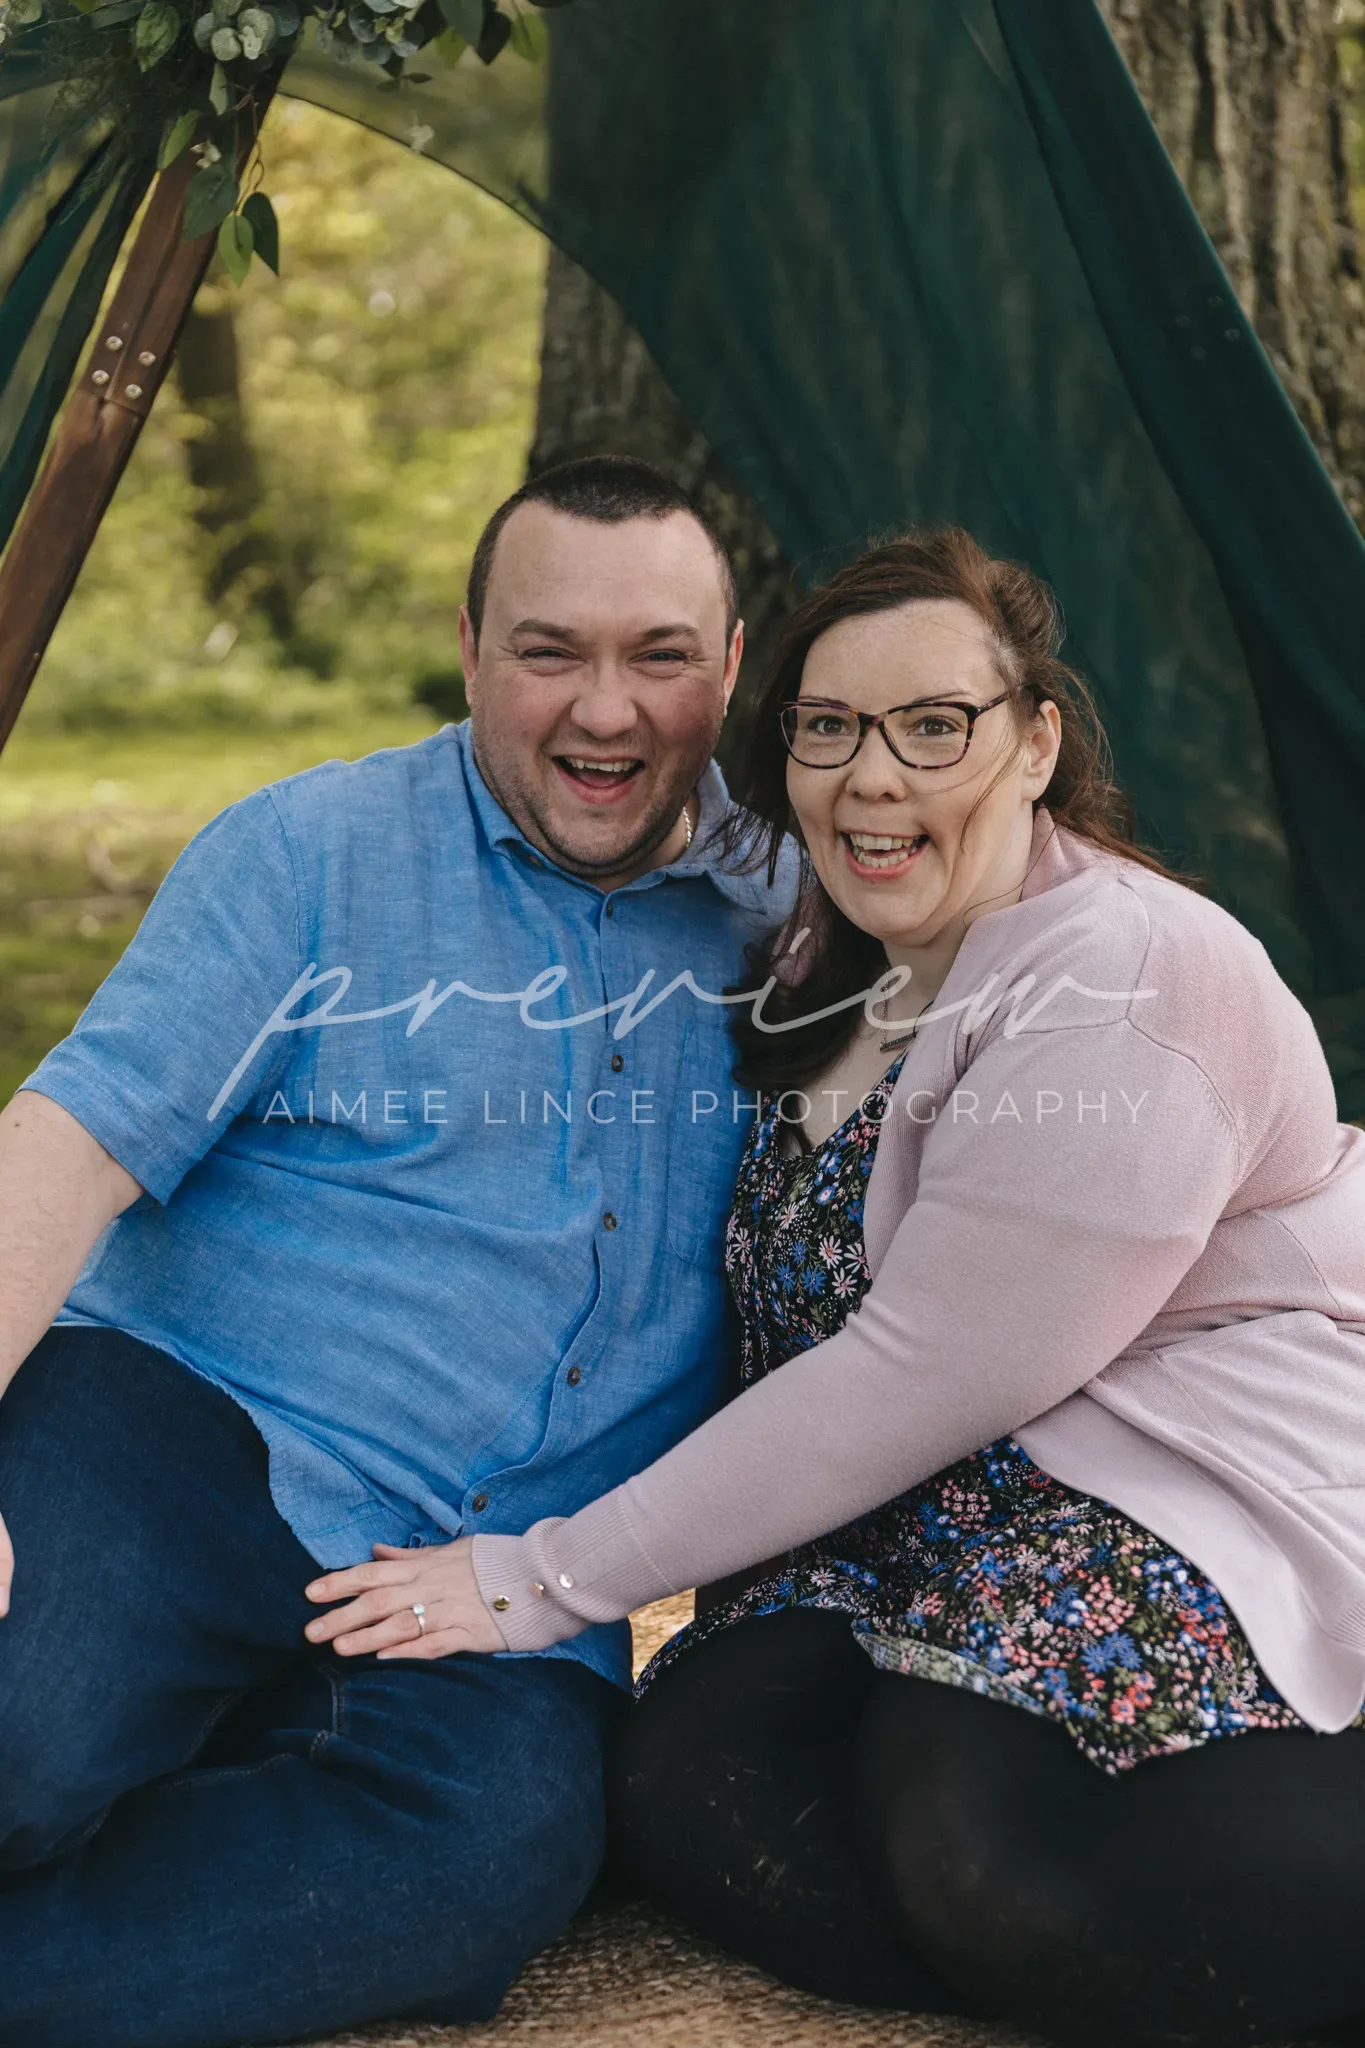 A happy couple sits closely under a tree with a decorative green fabric draped above. The man, in a blue shirt, and the woman, named Samantha, in a cardigan and floral dress, are